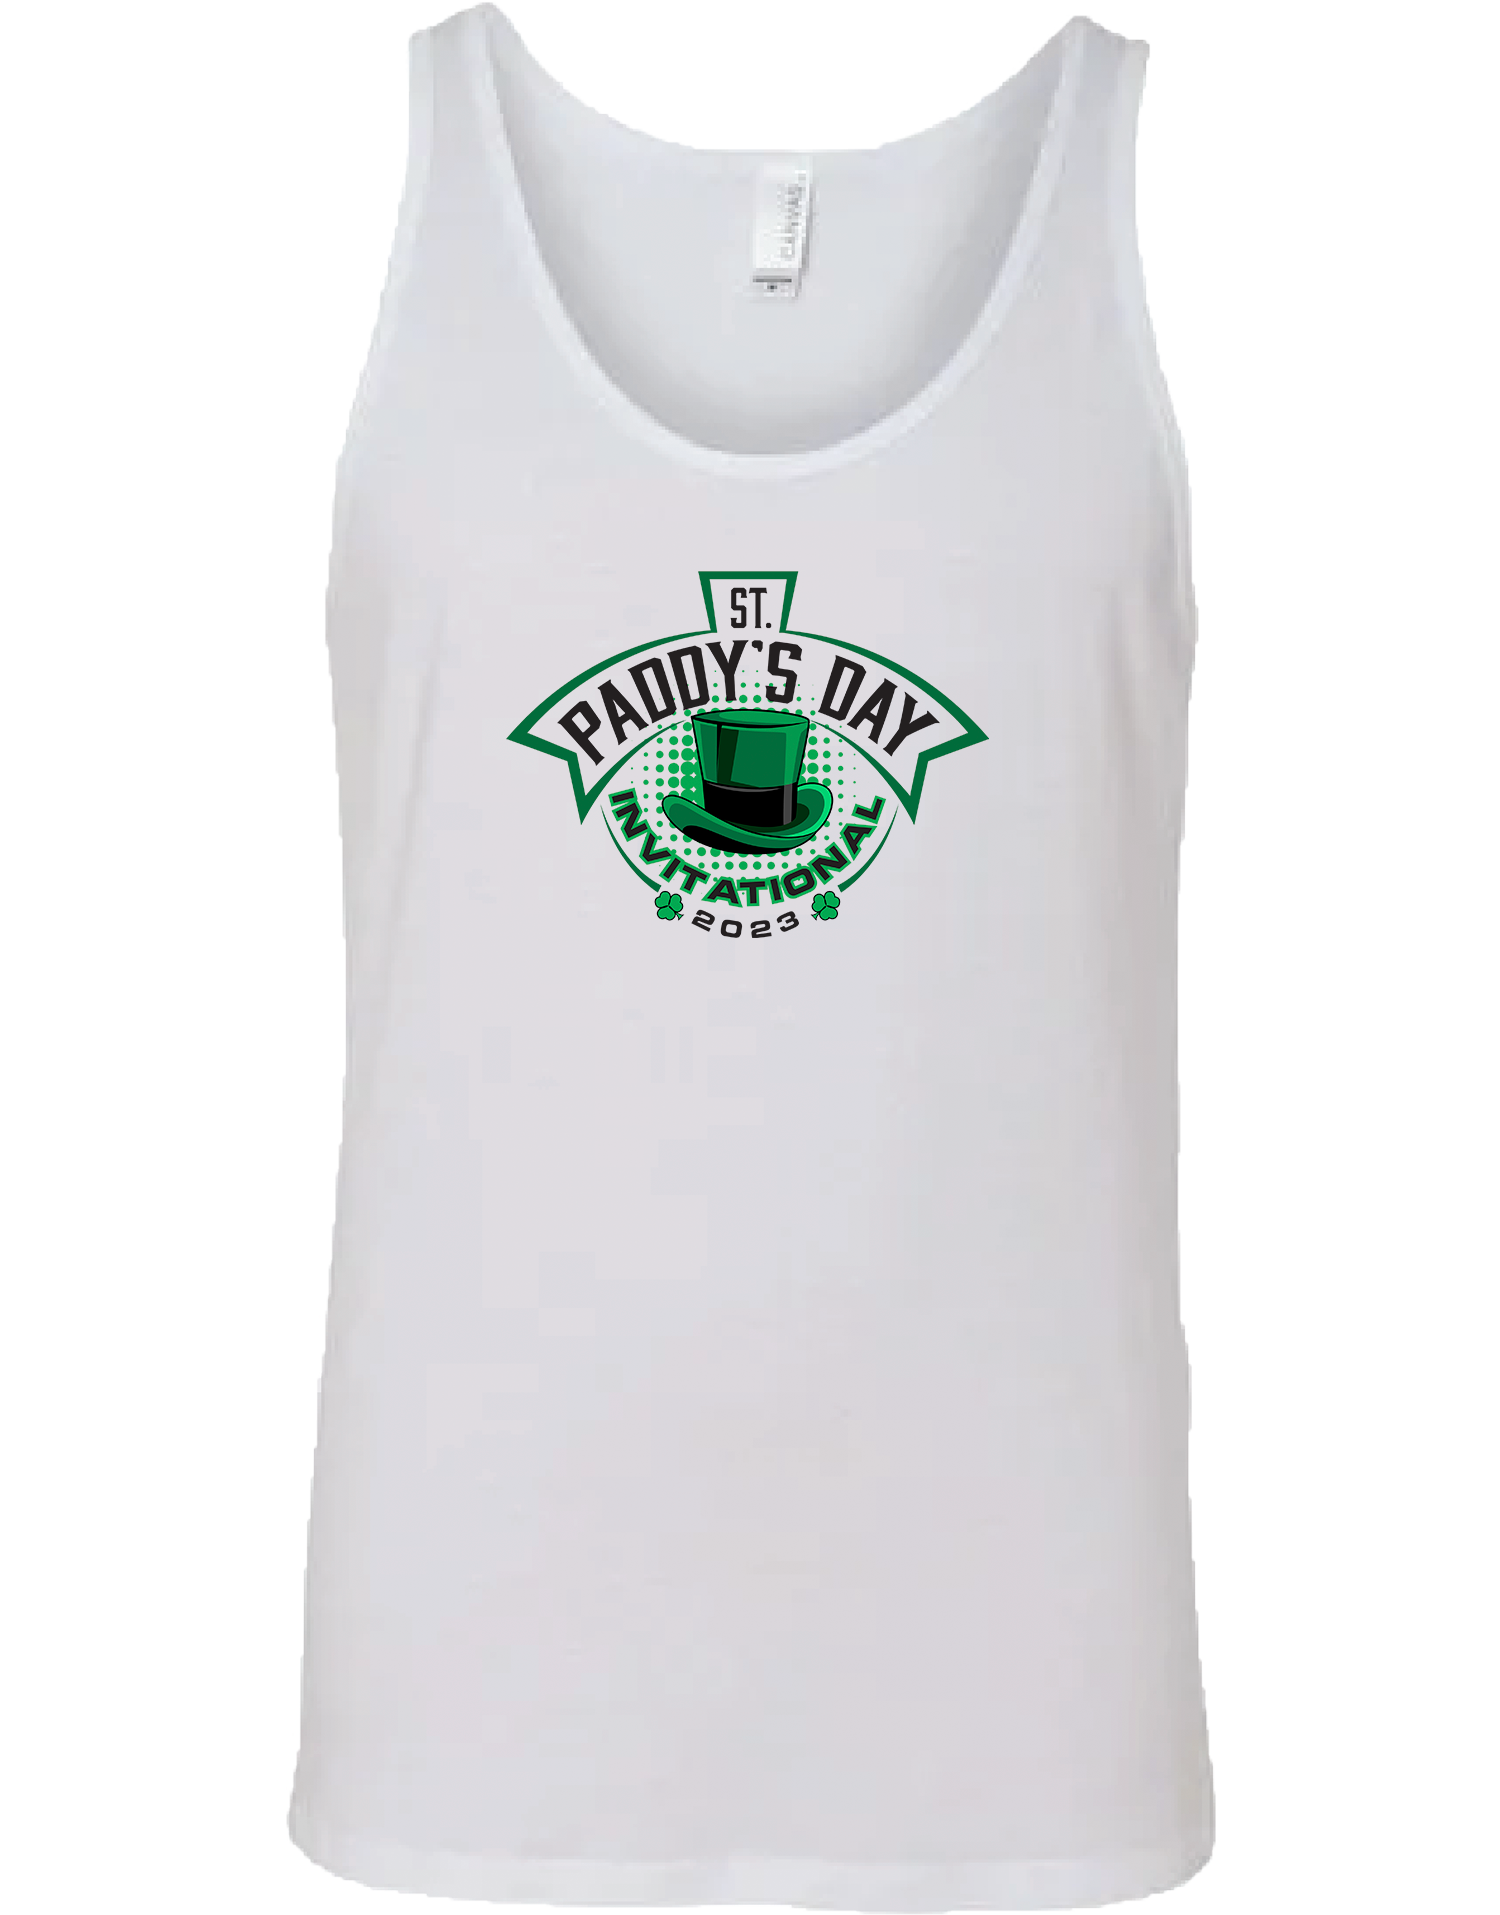 TANK TOP - 2023 St. Paddy's Day Invitational